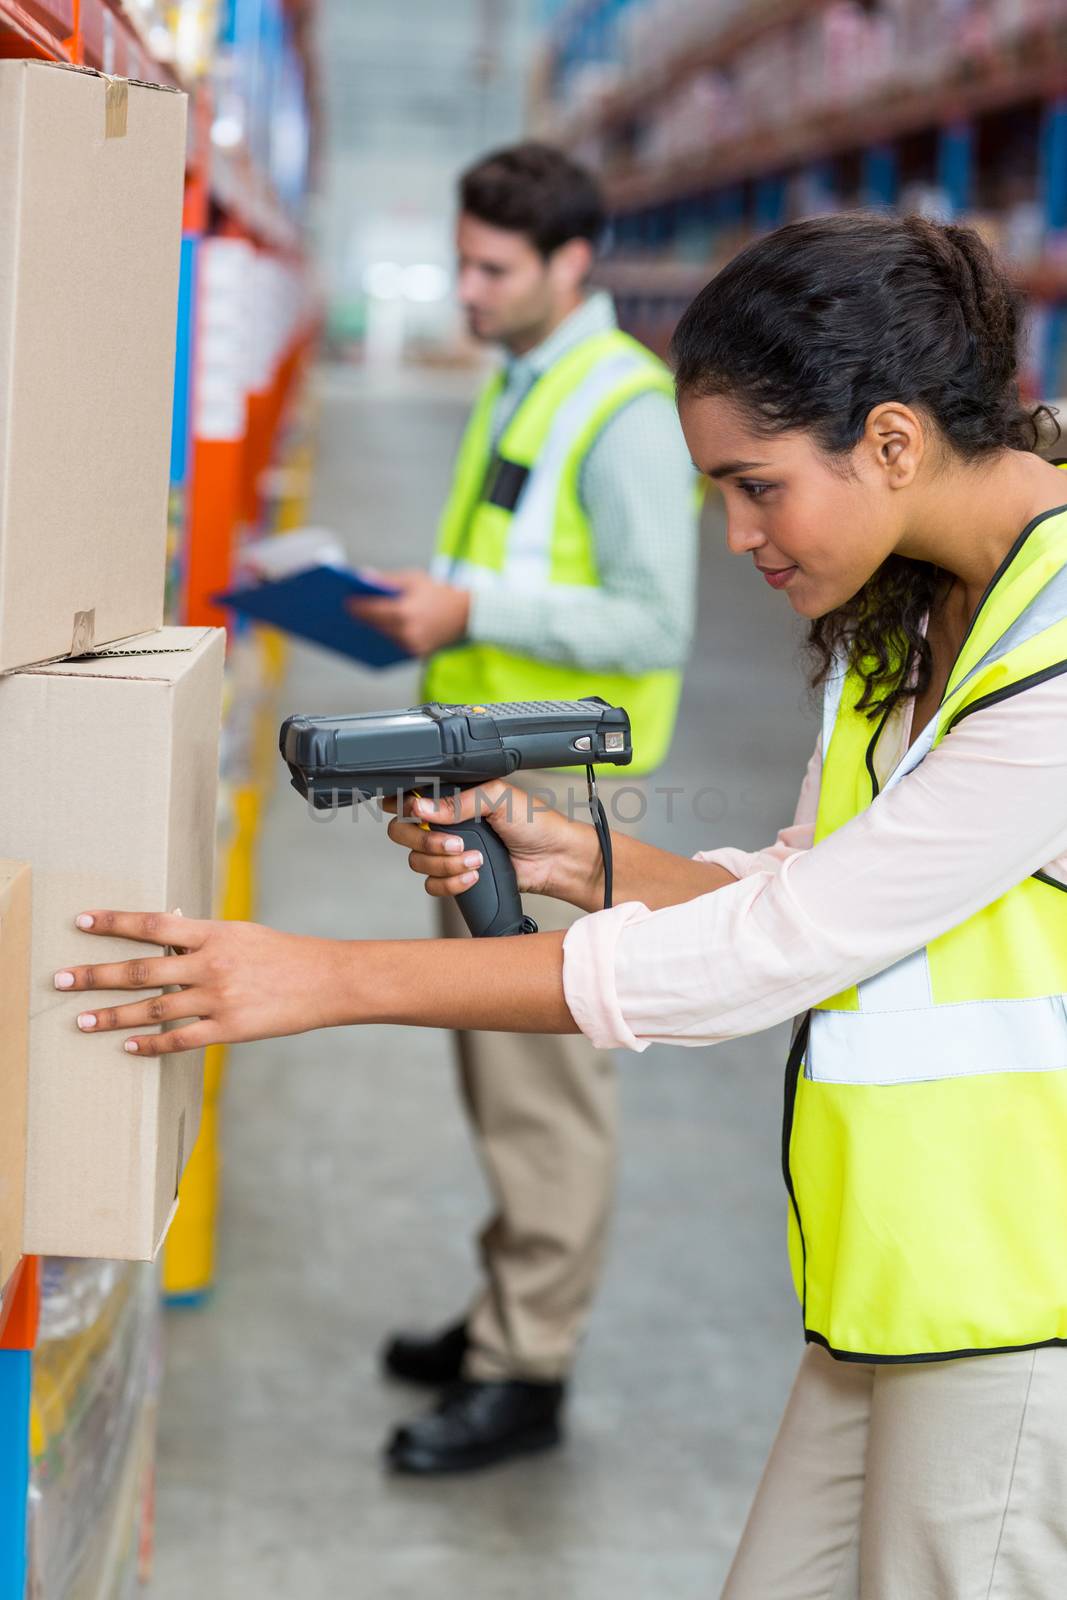 Focus of serious worker is working on cardboard boxes in a warehouse